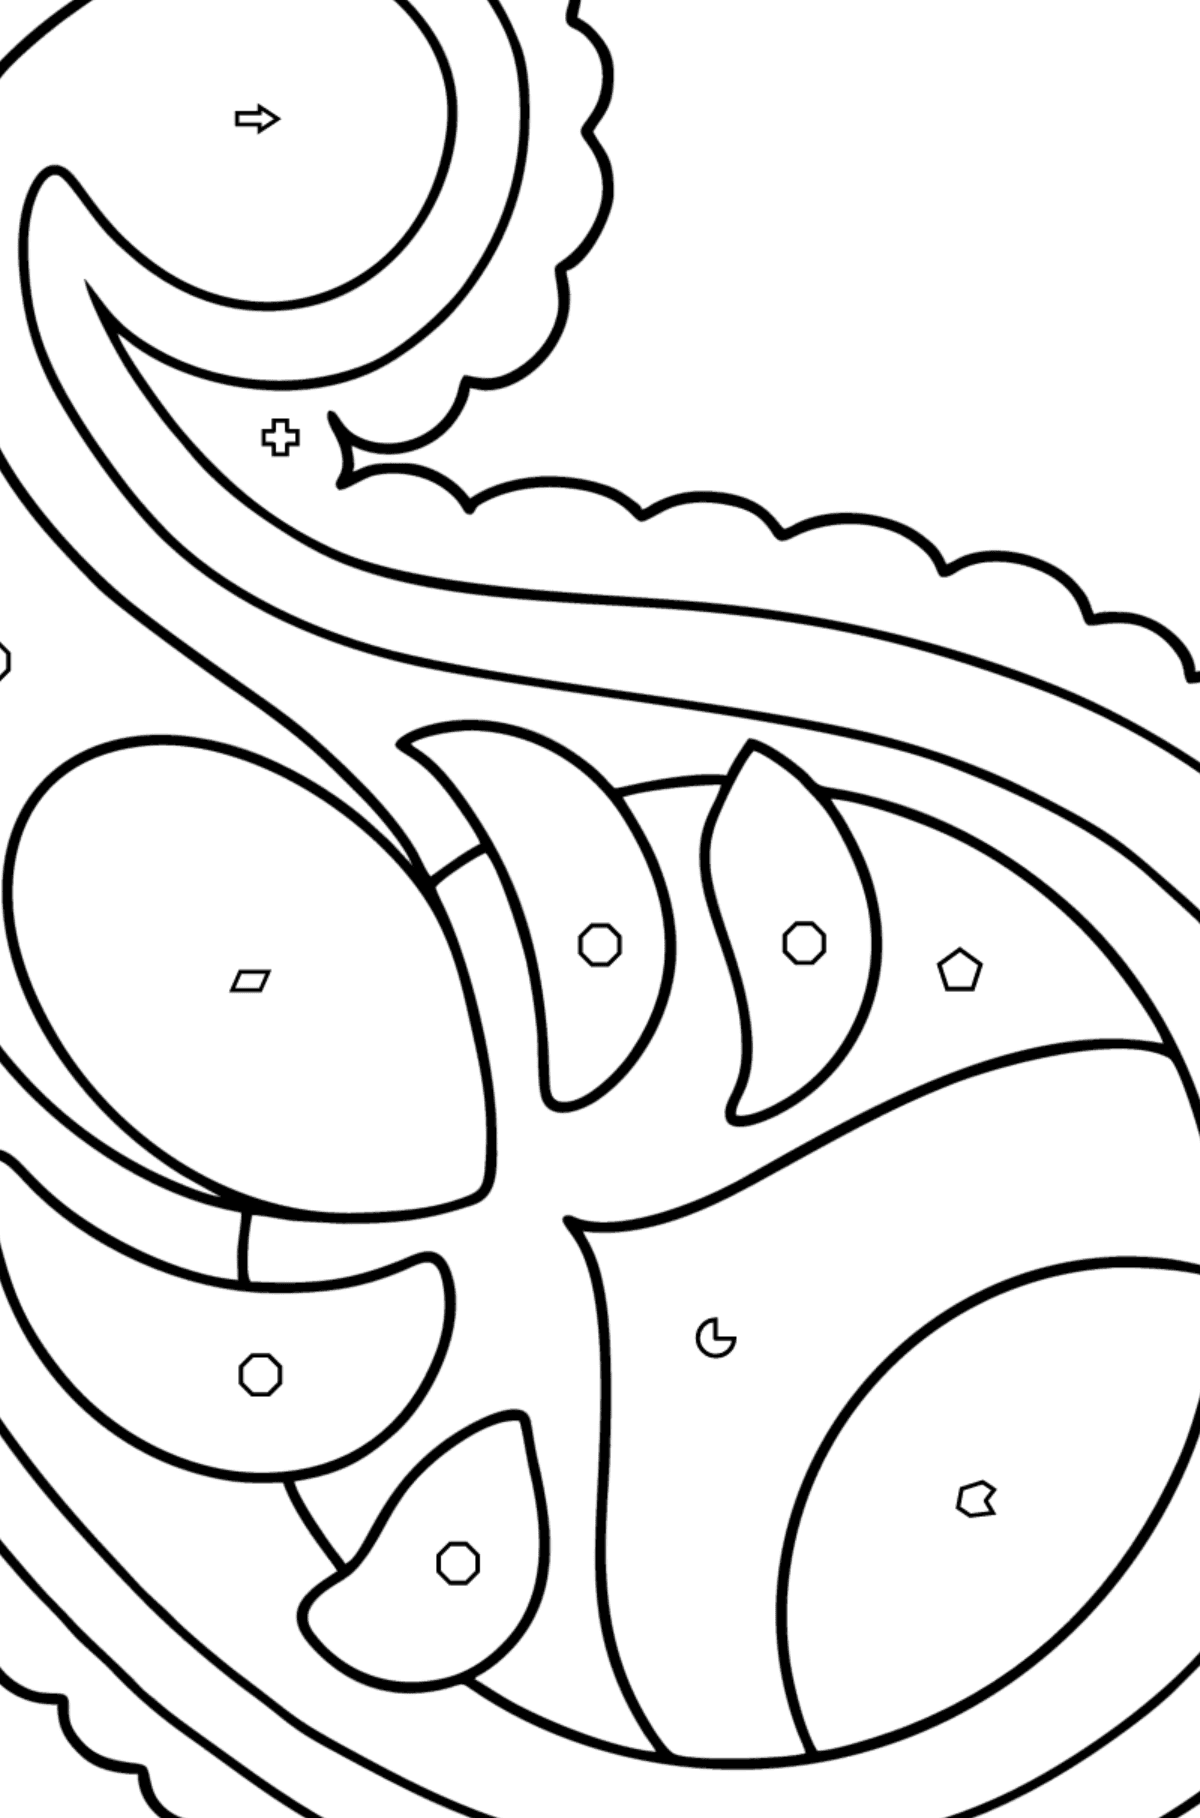 Paisley for Kids coloring page - Coloring by Geometric Shapes for Kids